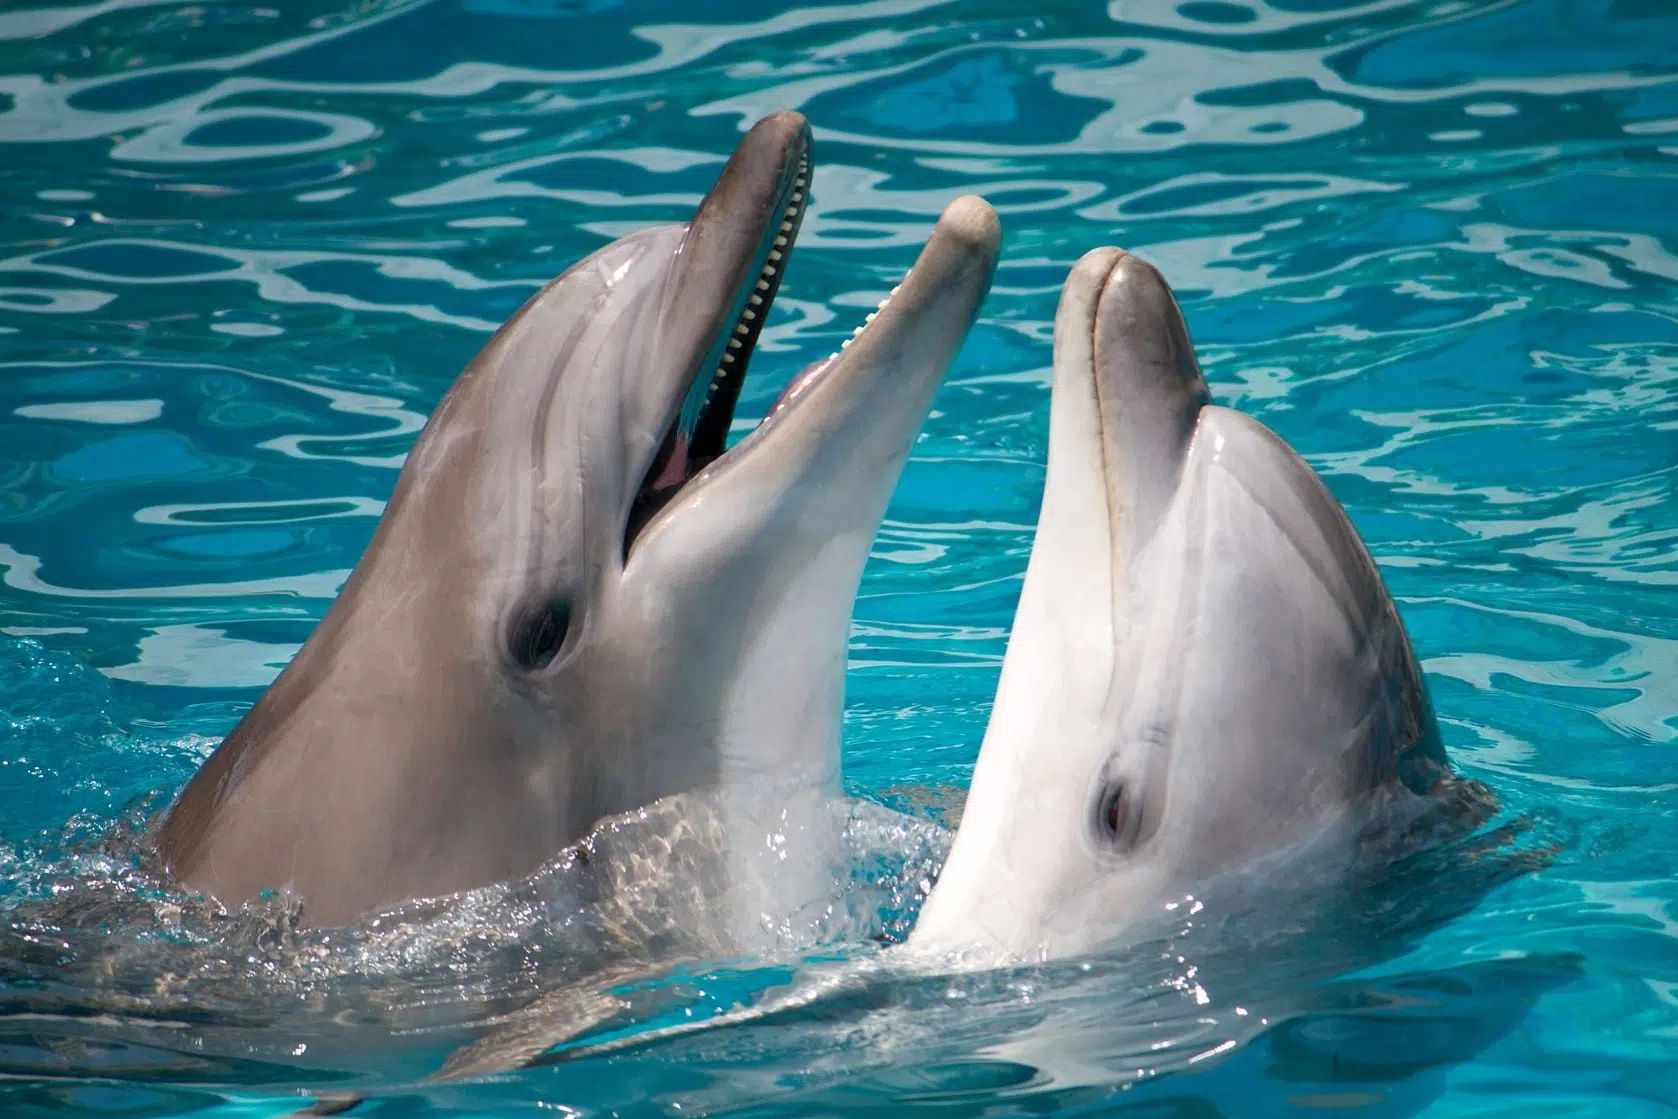 science-has-discovered-that-dolphins-call-each-other-by-name-94-3